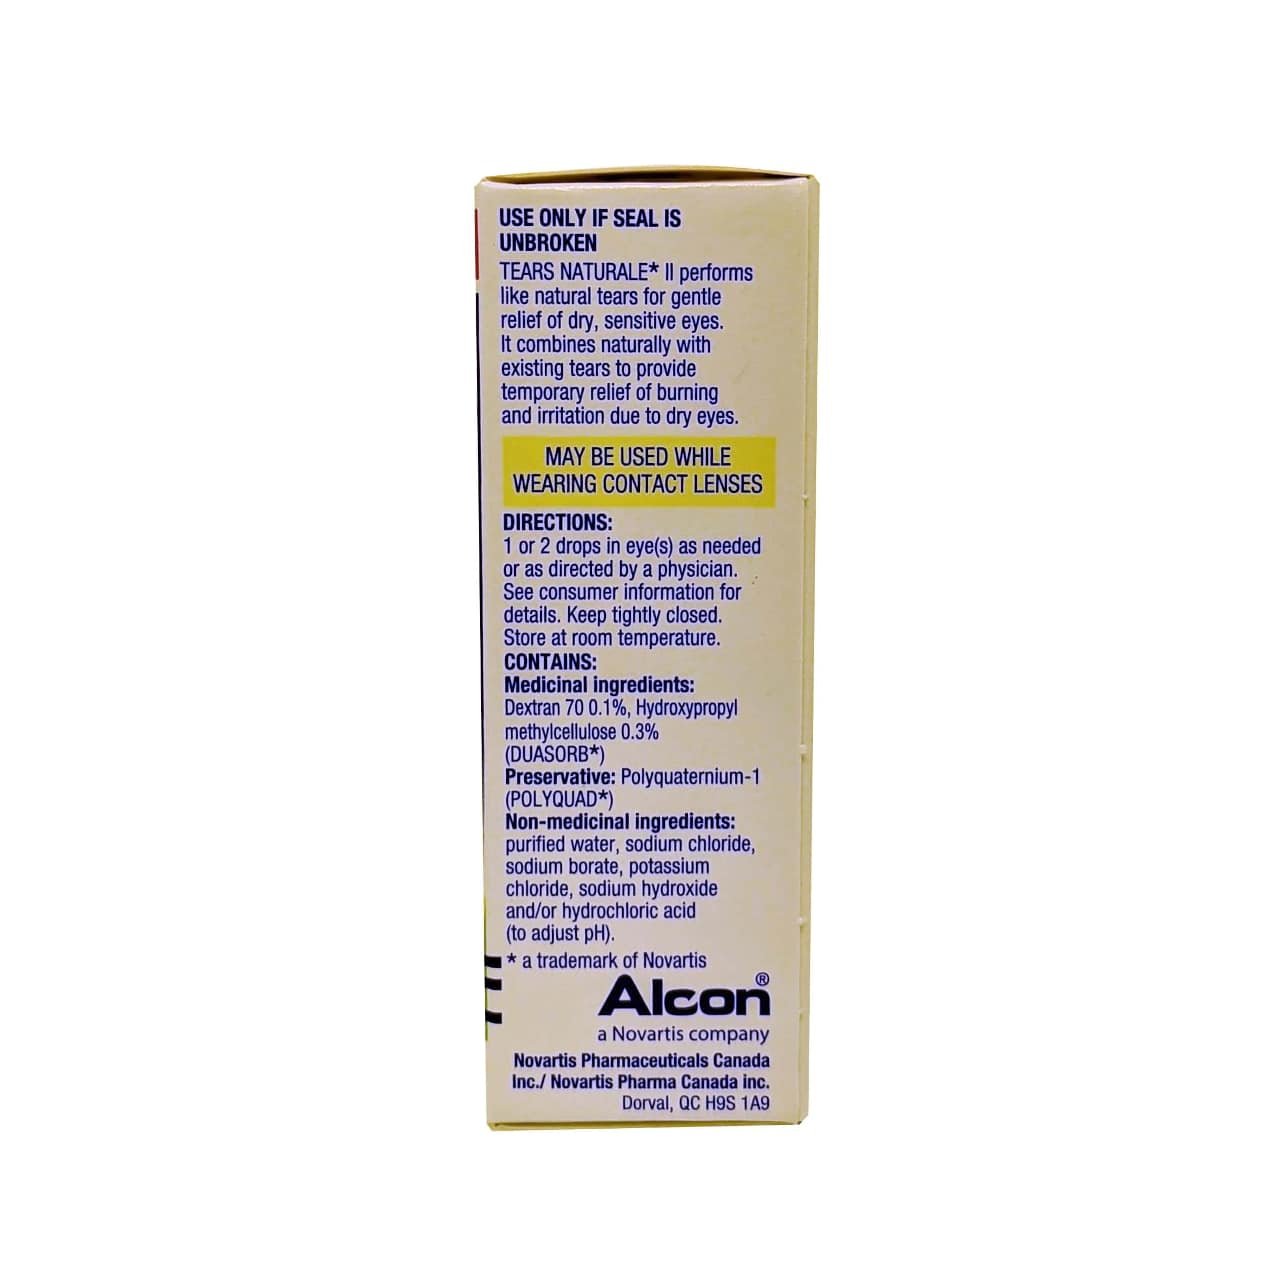 Product details, directions, and ingredients for Alcon Tears Naturale II Lubricant Eye Drops in English